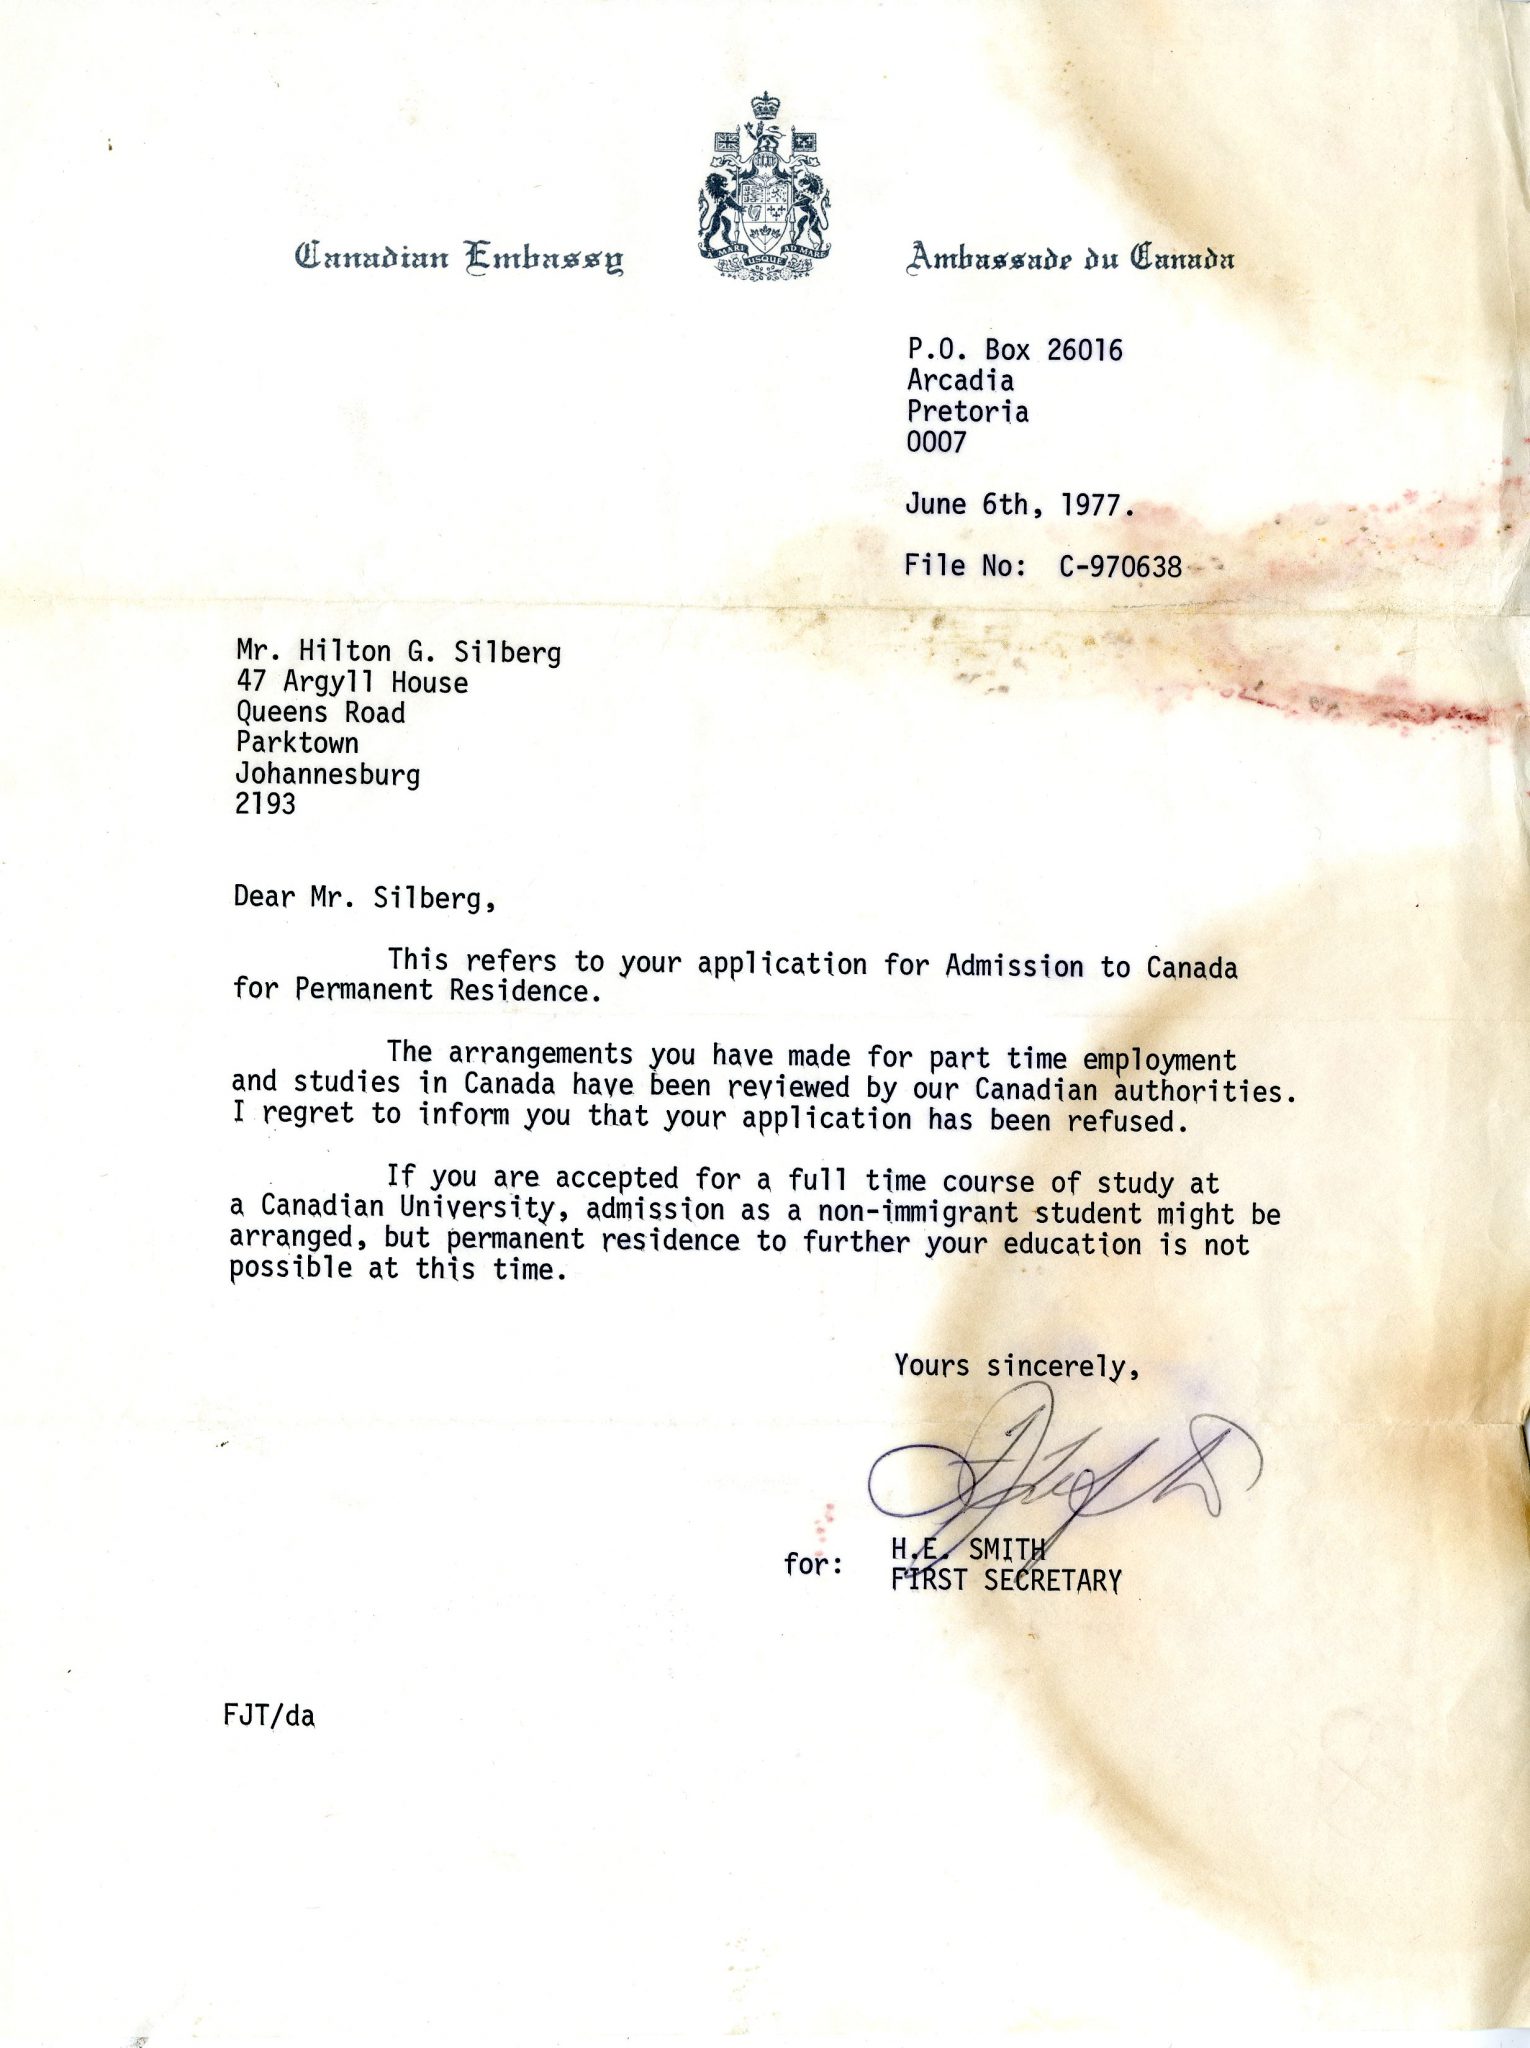 Canadian Embassy rejection letter